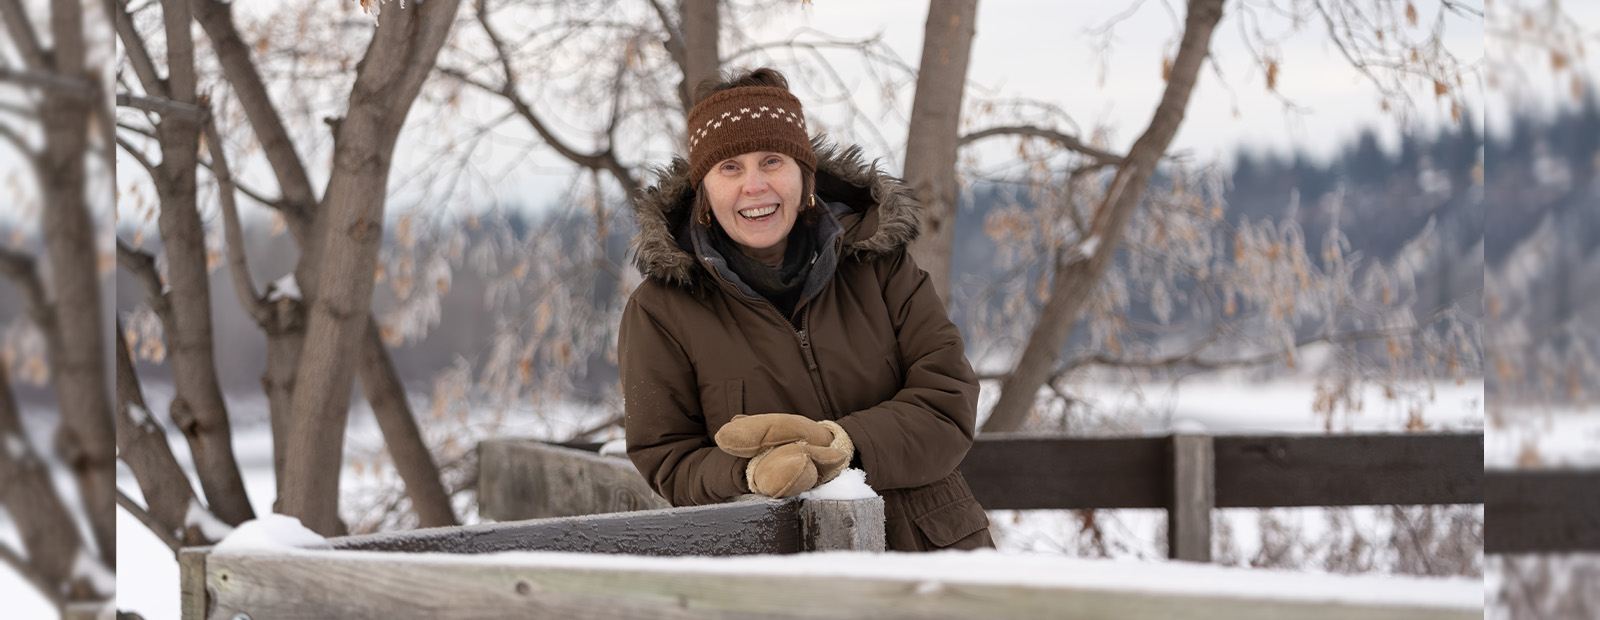 Audrey Whitson stands on a snowy bridge in Edmonton's river valley, smiling.